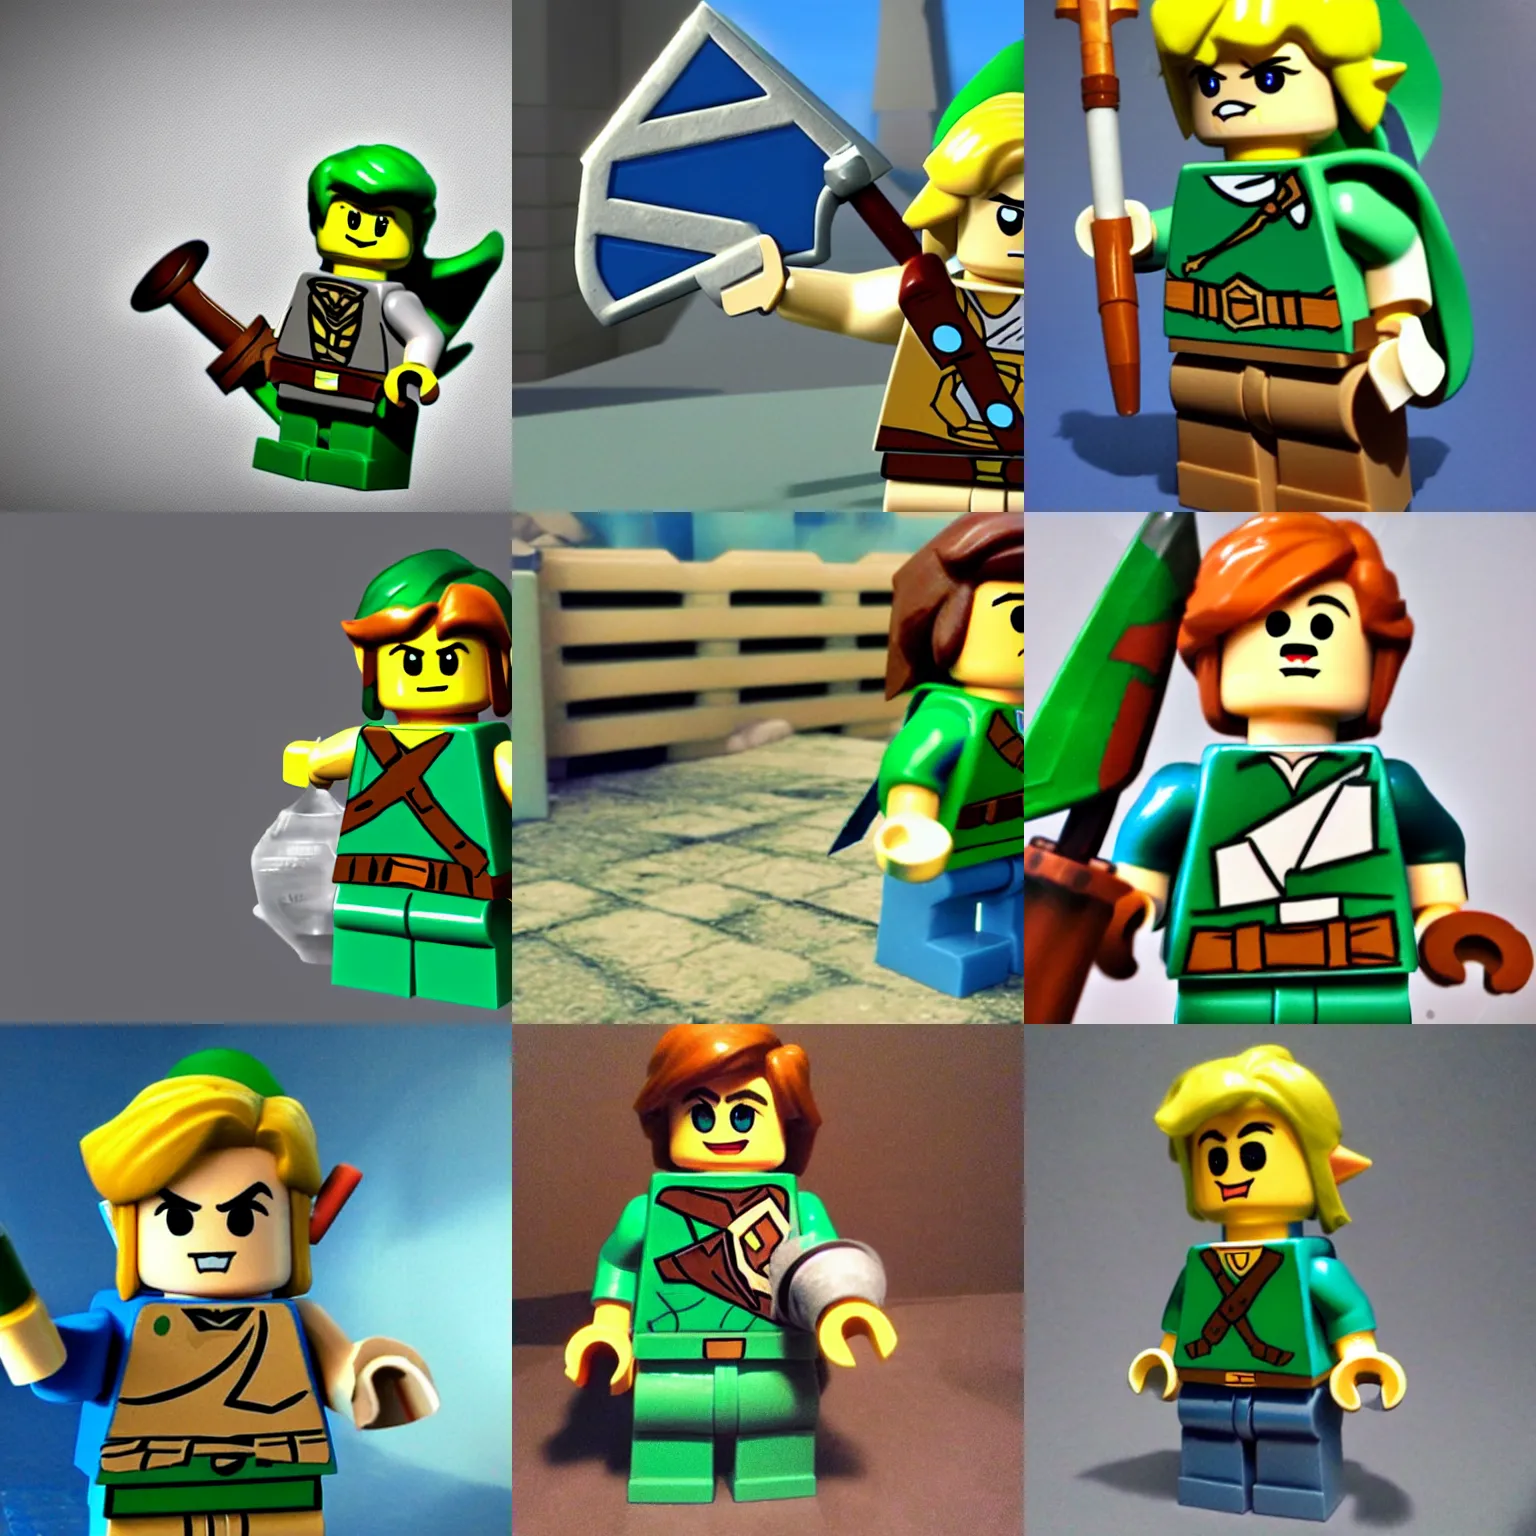 link from the legend of zelda, lego movie style, Stable Diffusion